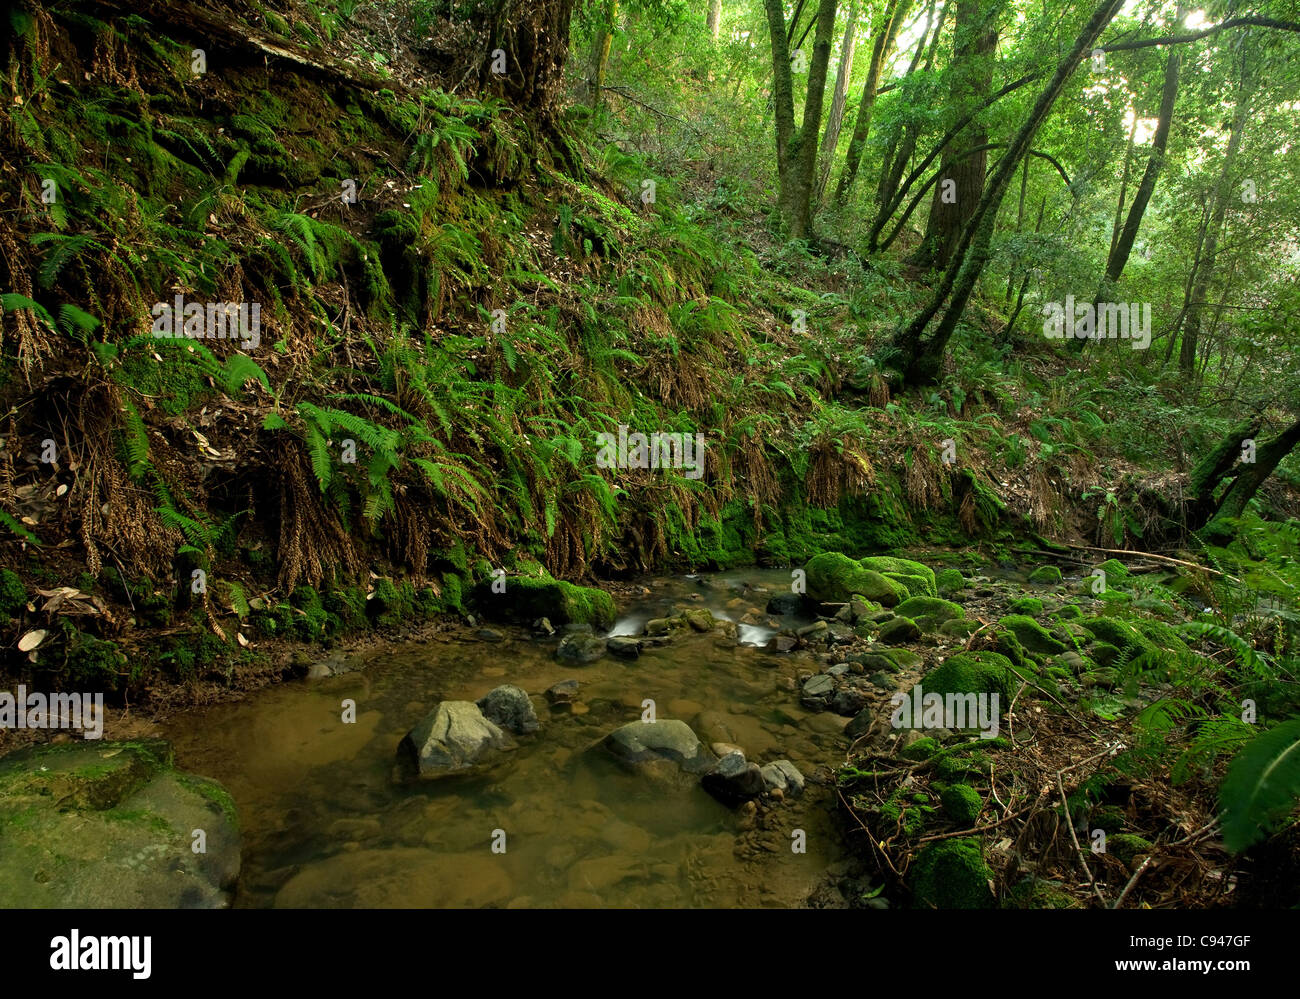 A remote prehistoric rain forest with large ferns, located in California Stock Photo